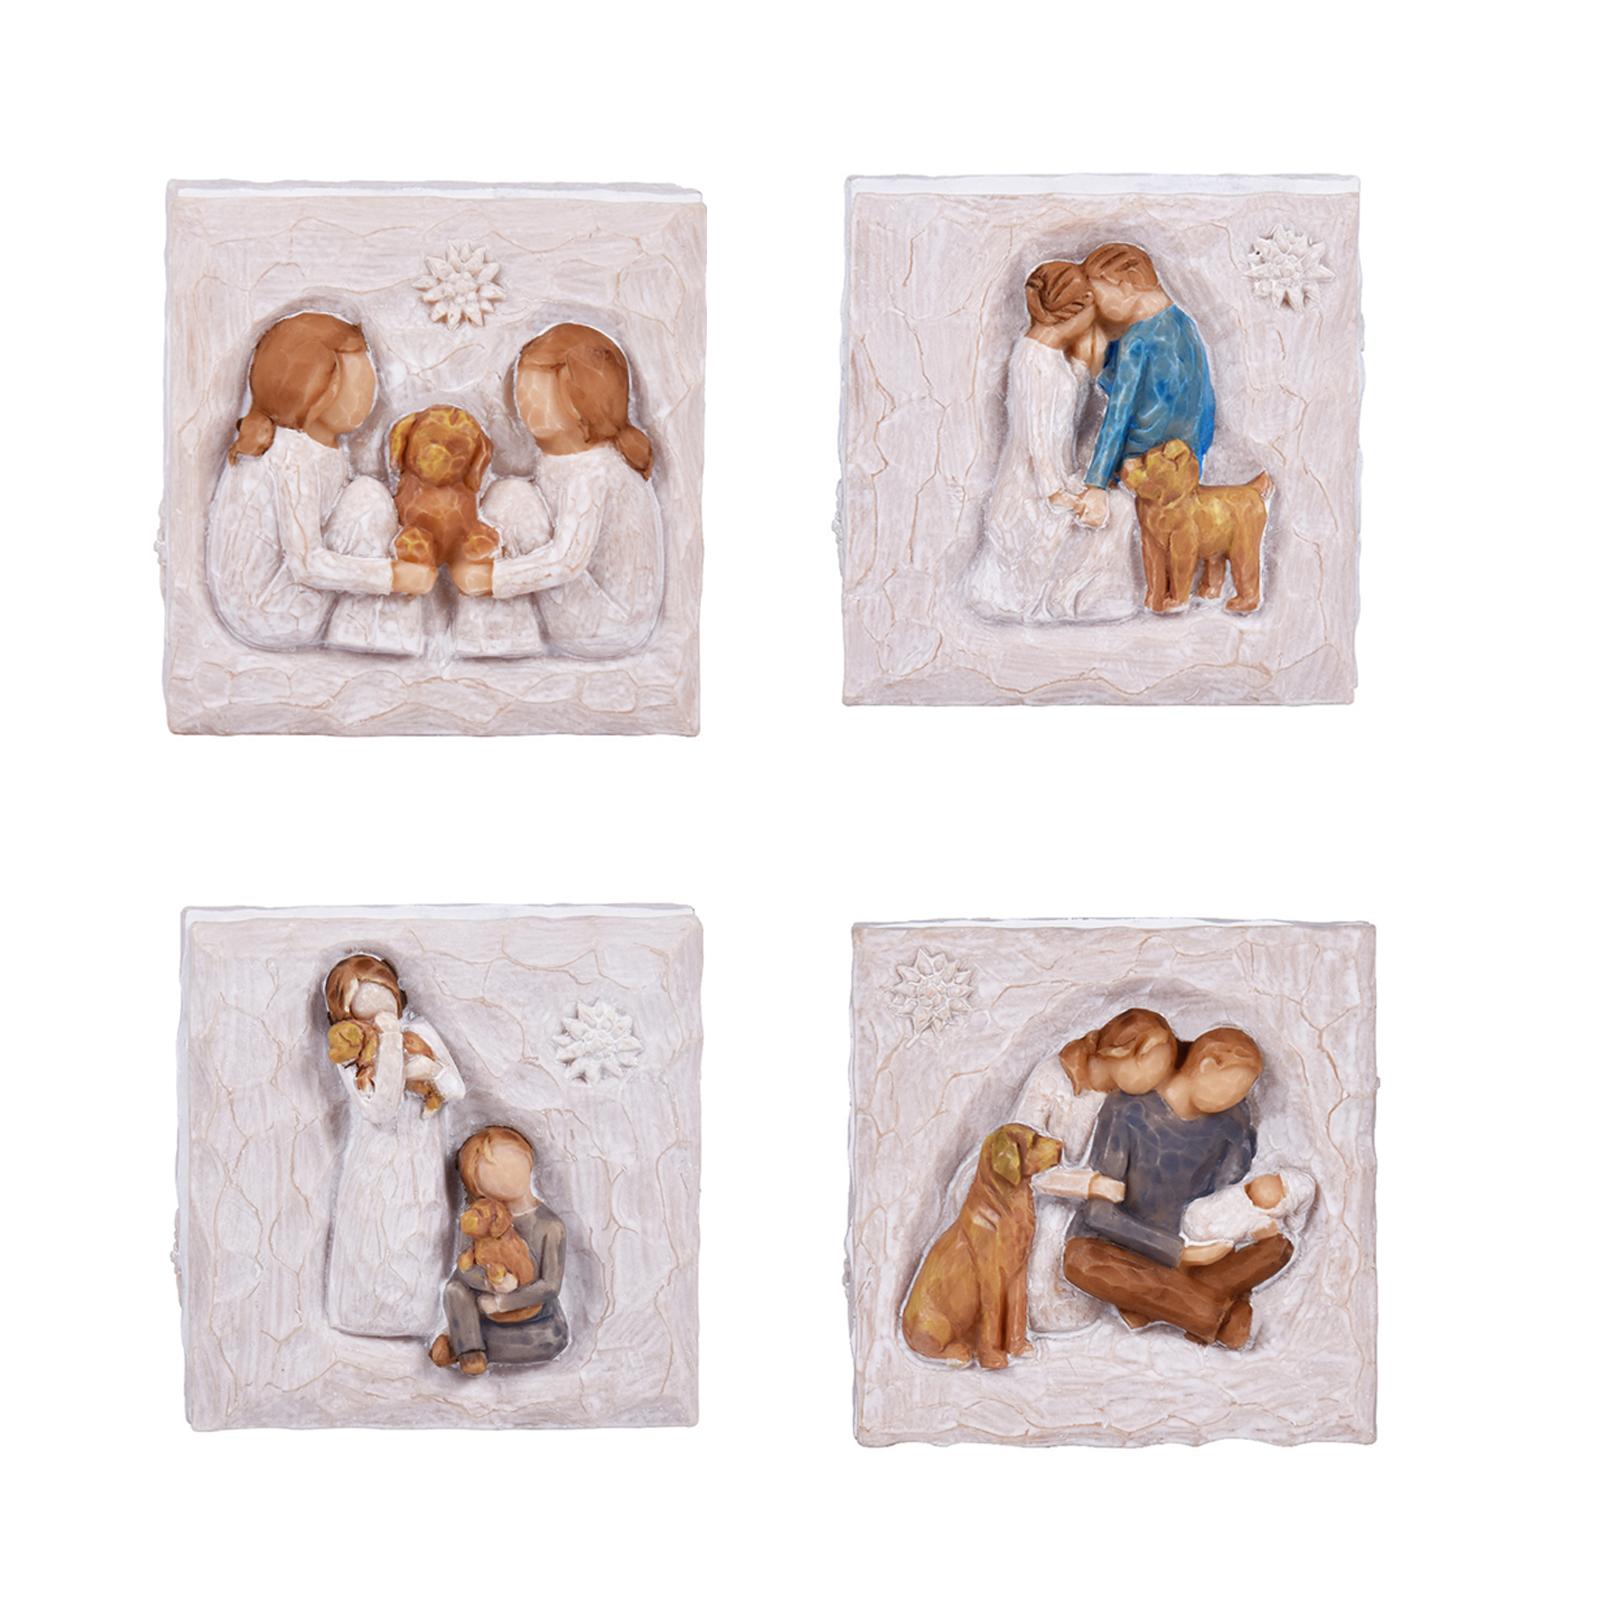 Beautiful Keepsake Box Friendship Box Gift for Jewelry Rings Family with Dog